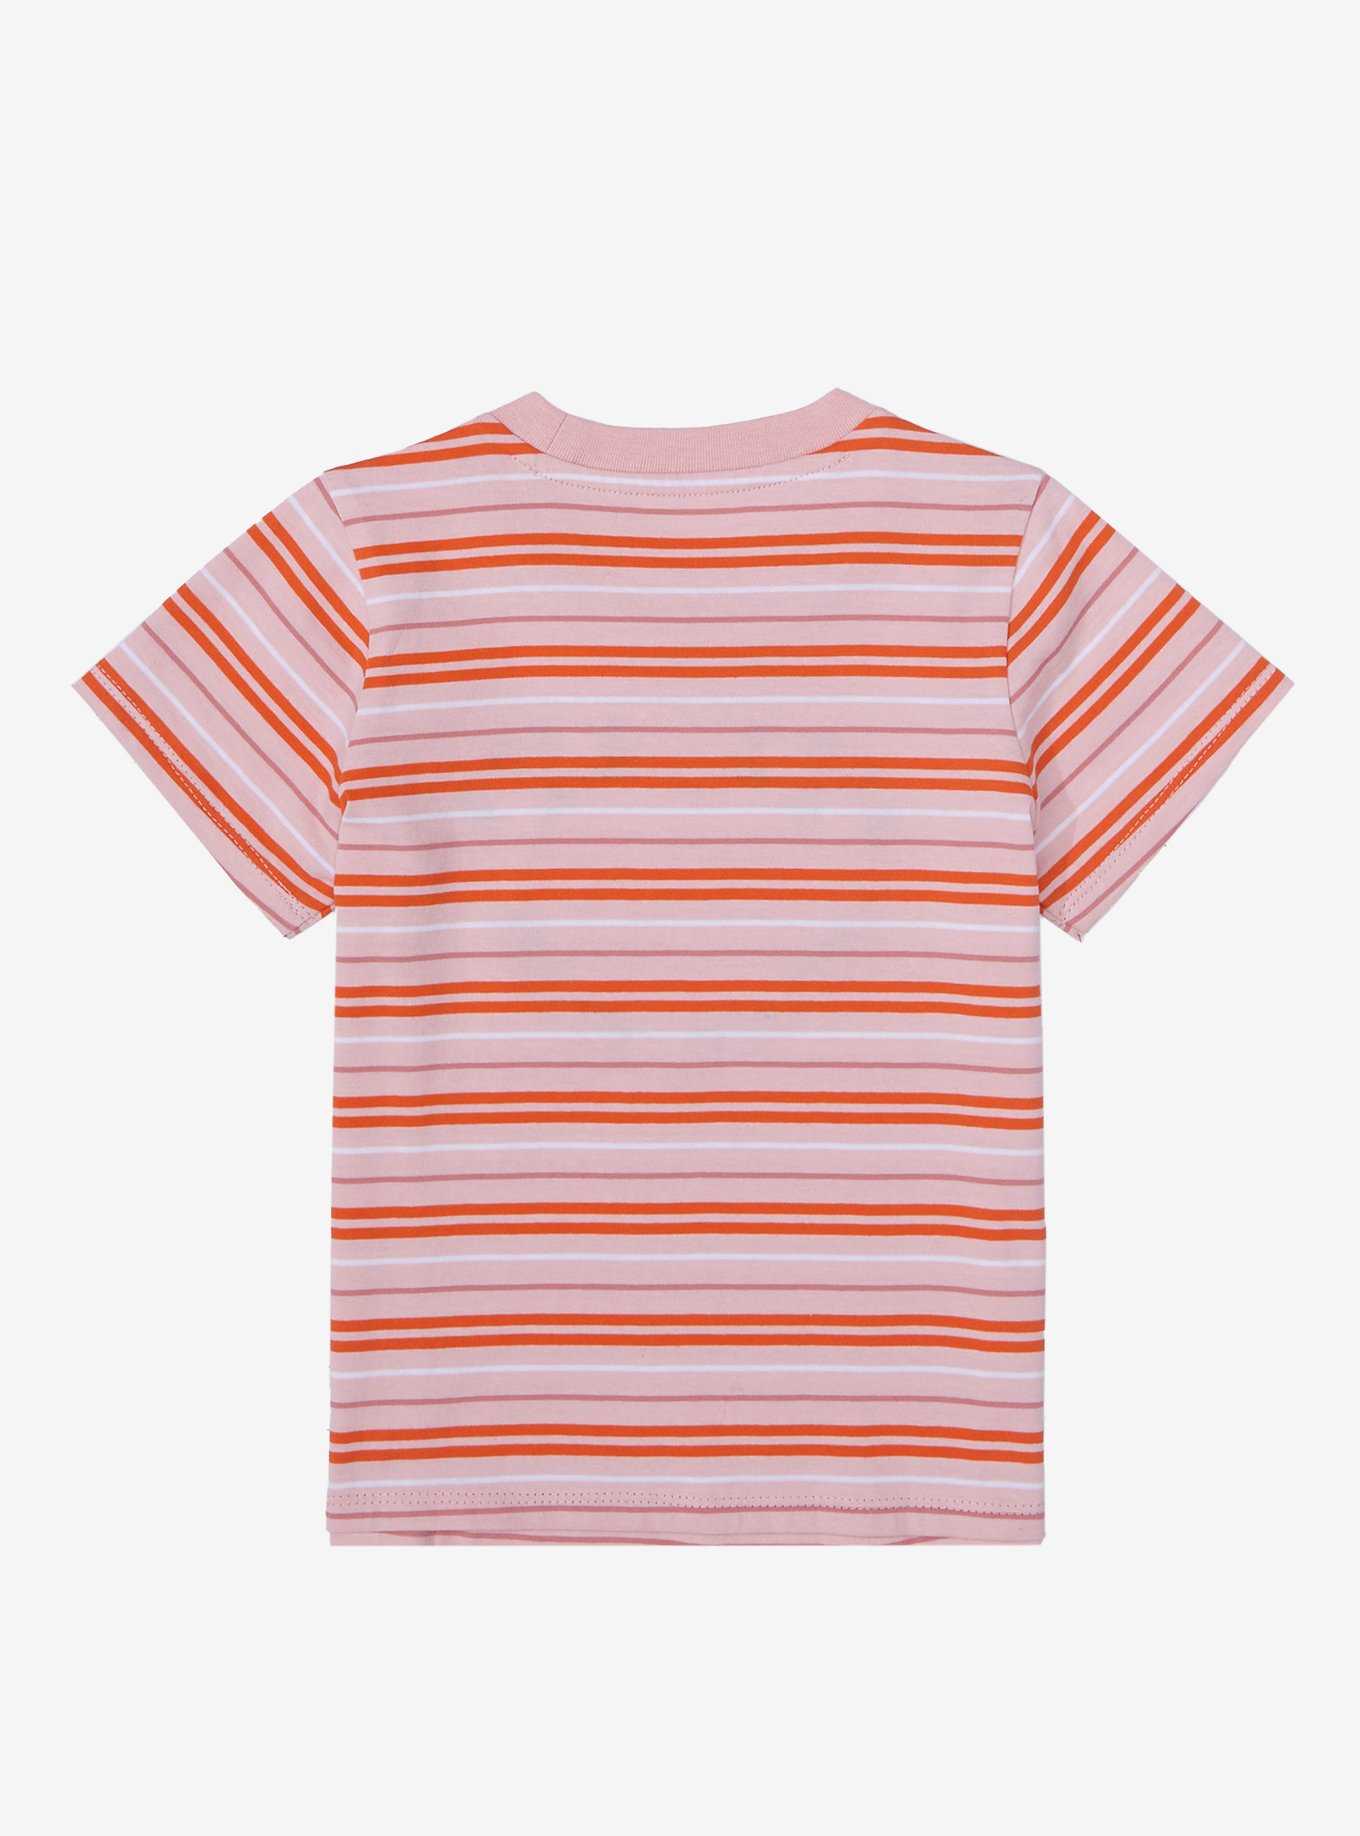 Sanrio My Melody Mushroom Striped Toddler T-Shirt - BoxLunch Exclusive, , hi-res